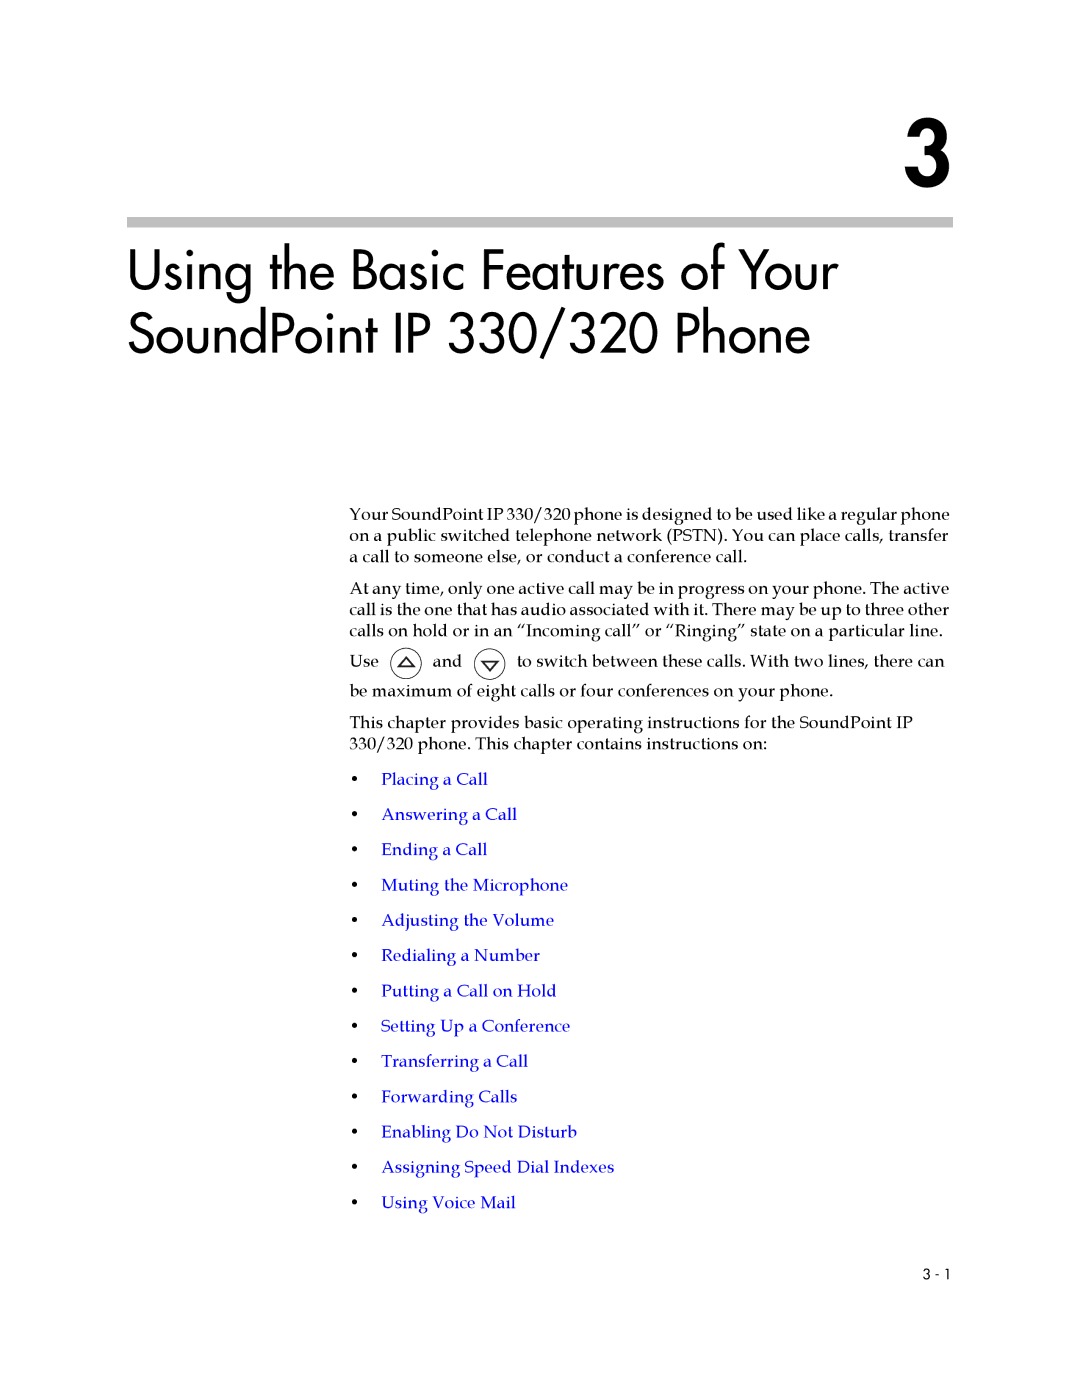 Polycom manual Using the Basic Features of Your SoundPoint IP 330/320 Phone 